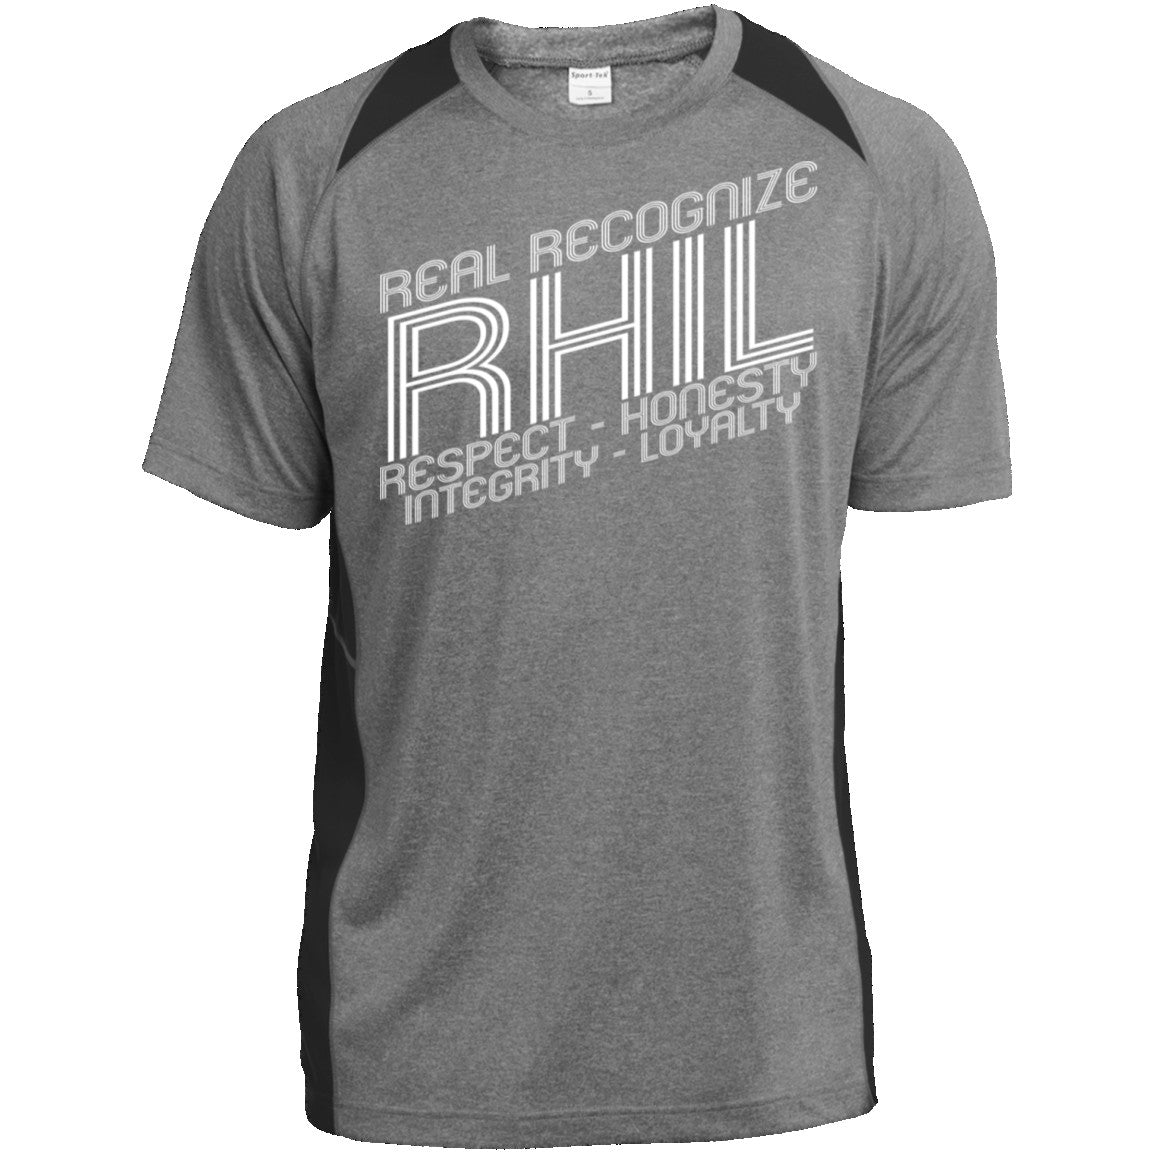 Real Recognize RHIL (Respect, Honesty, Integrity, Loyalty) Heather Colorblock Poly T-Shirt CustomCat